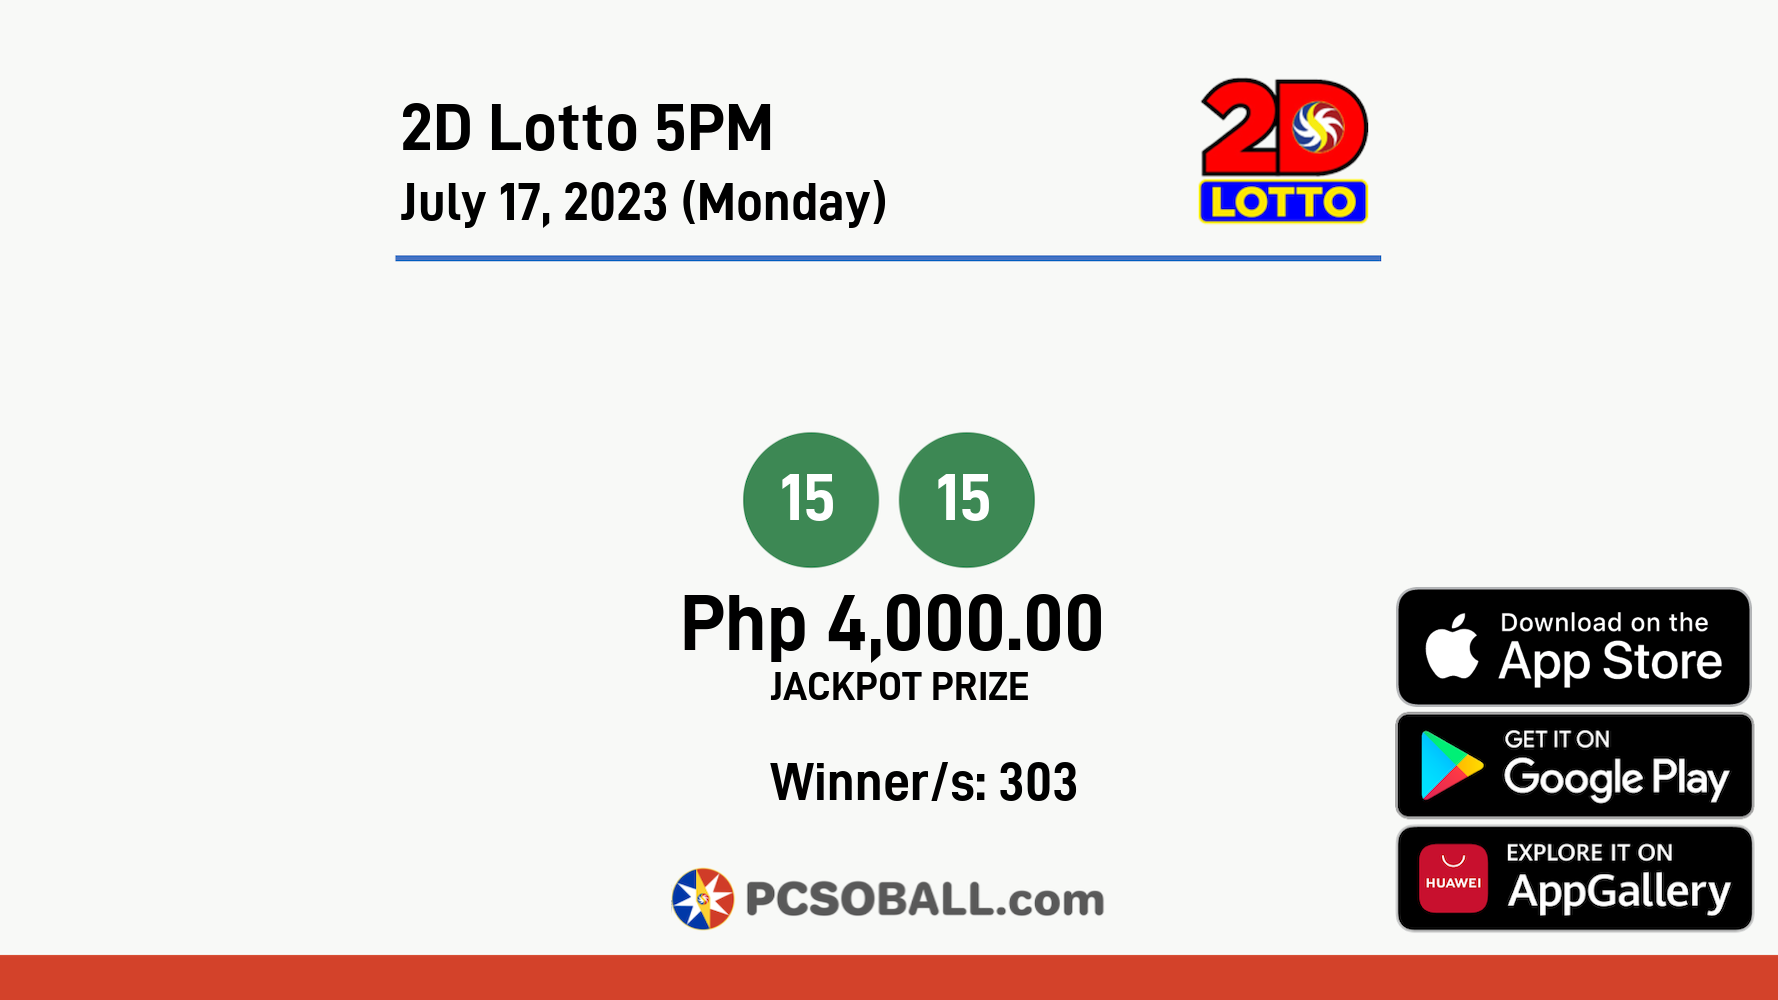 2D Lotto 5PM July 17, 2023 (Monday) Result